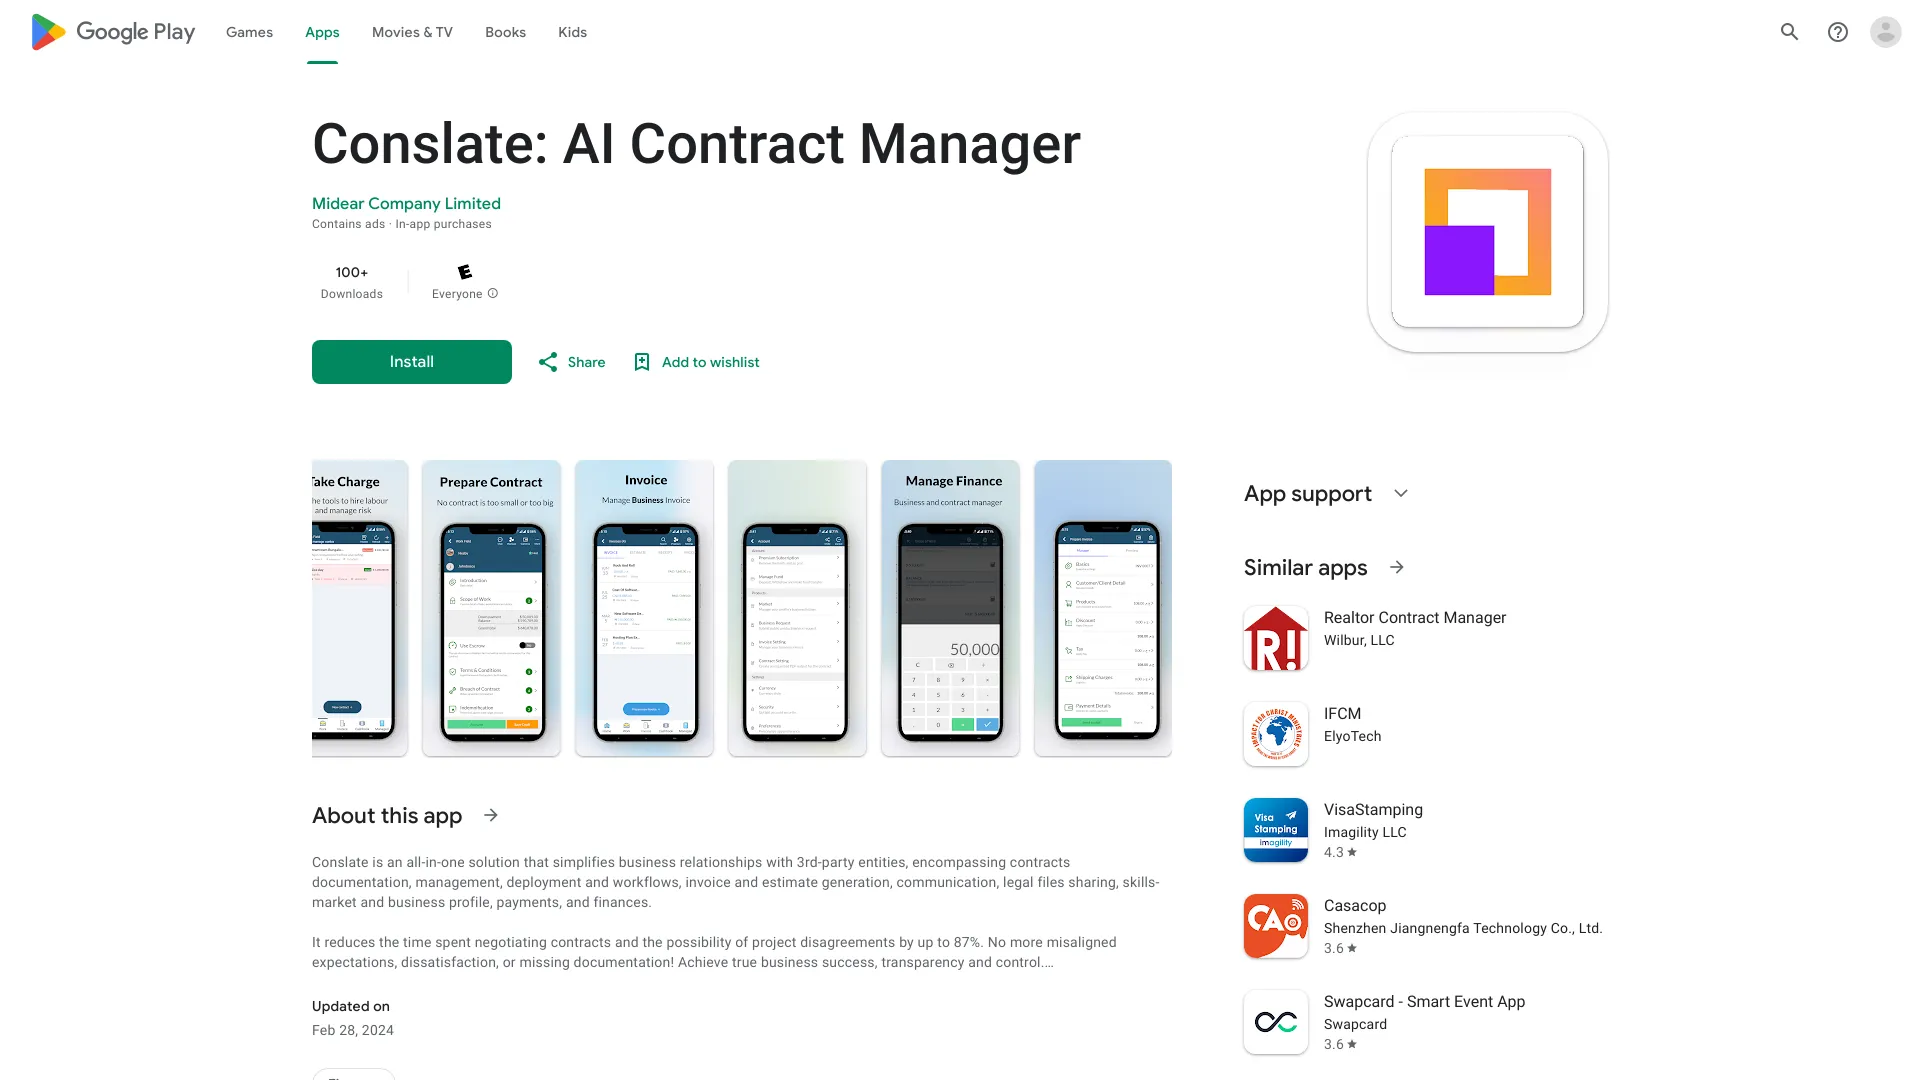 Conslate: AI Contract Manager